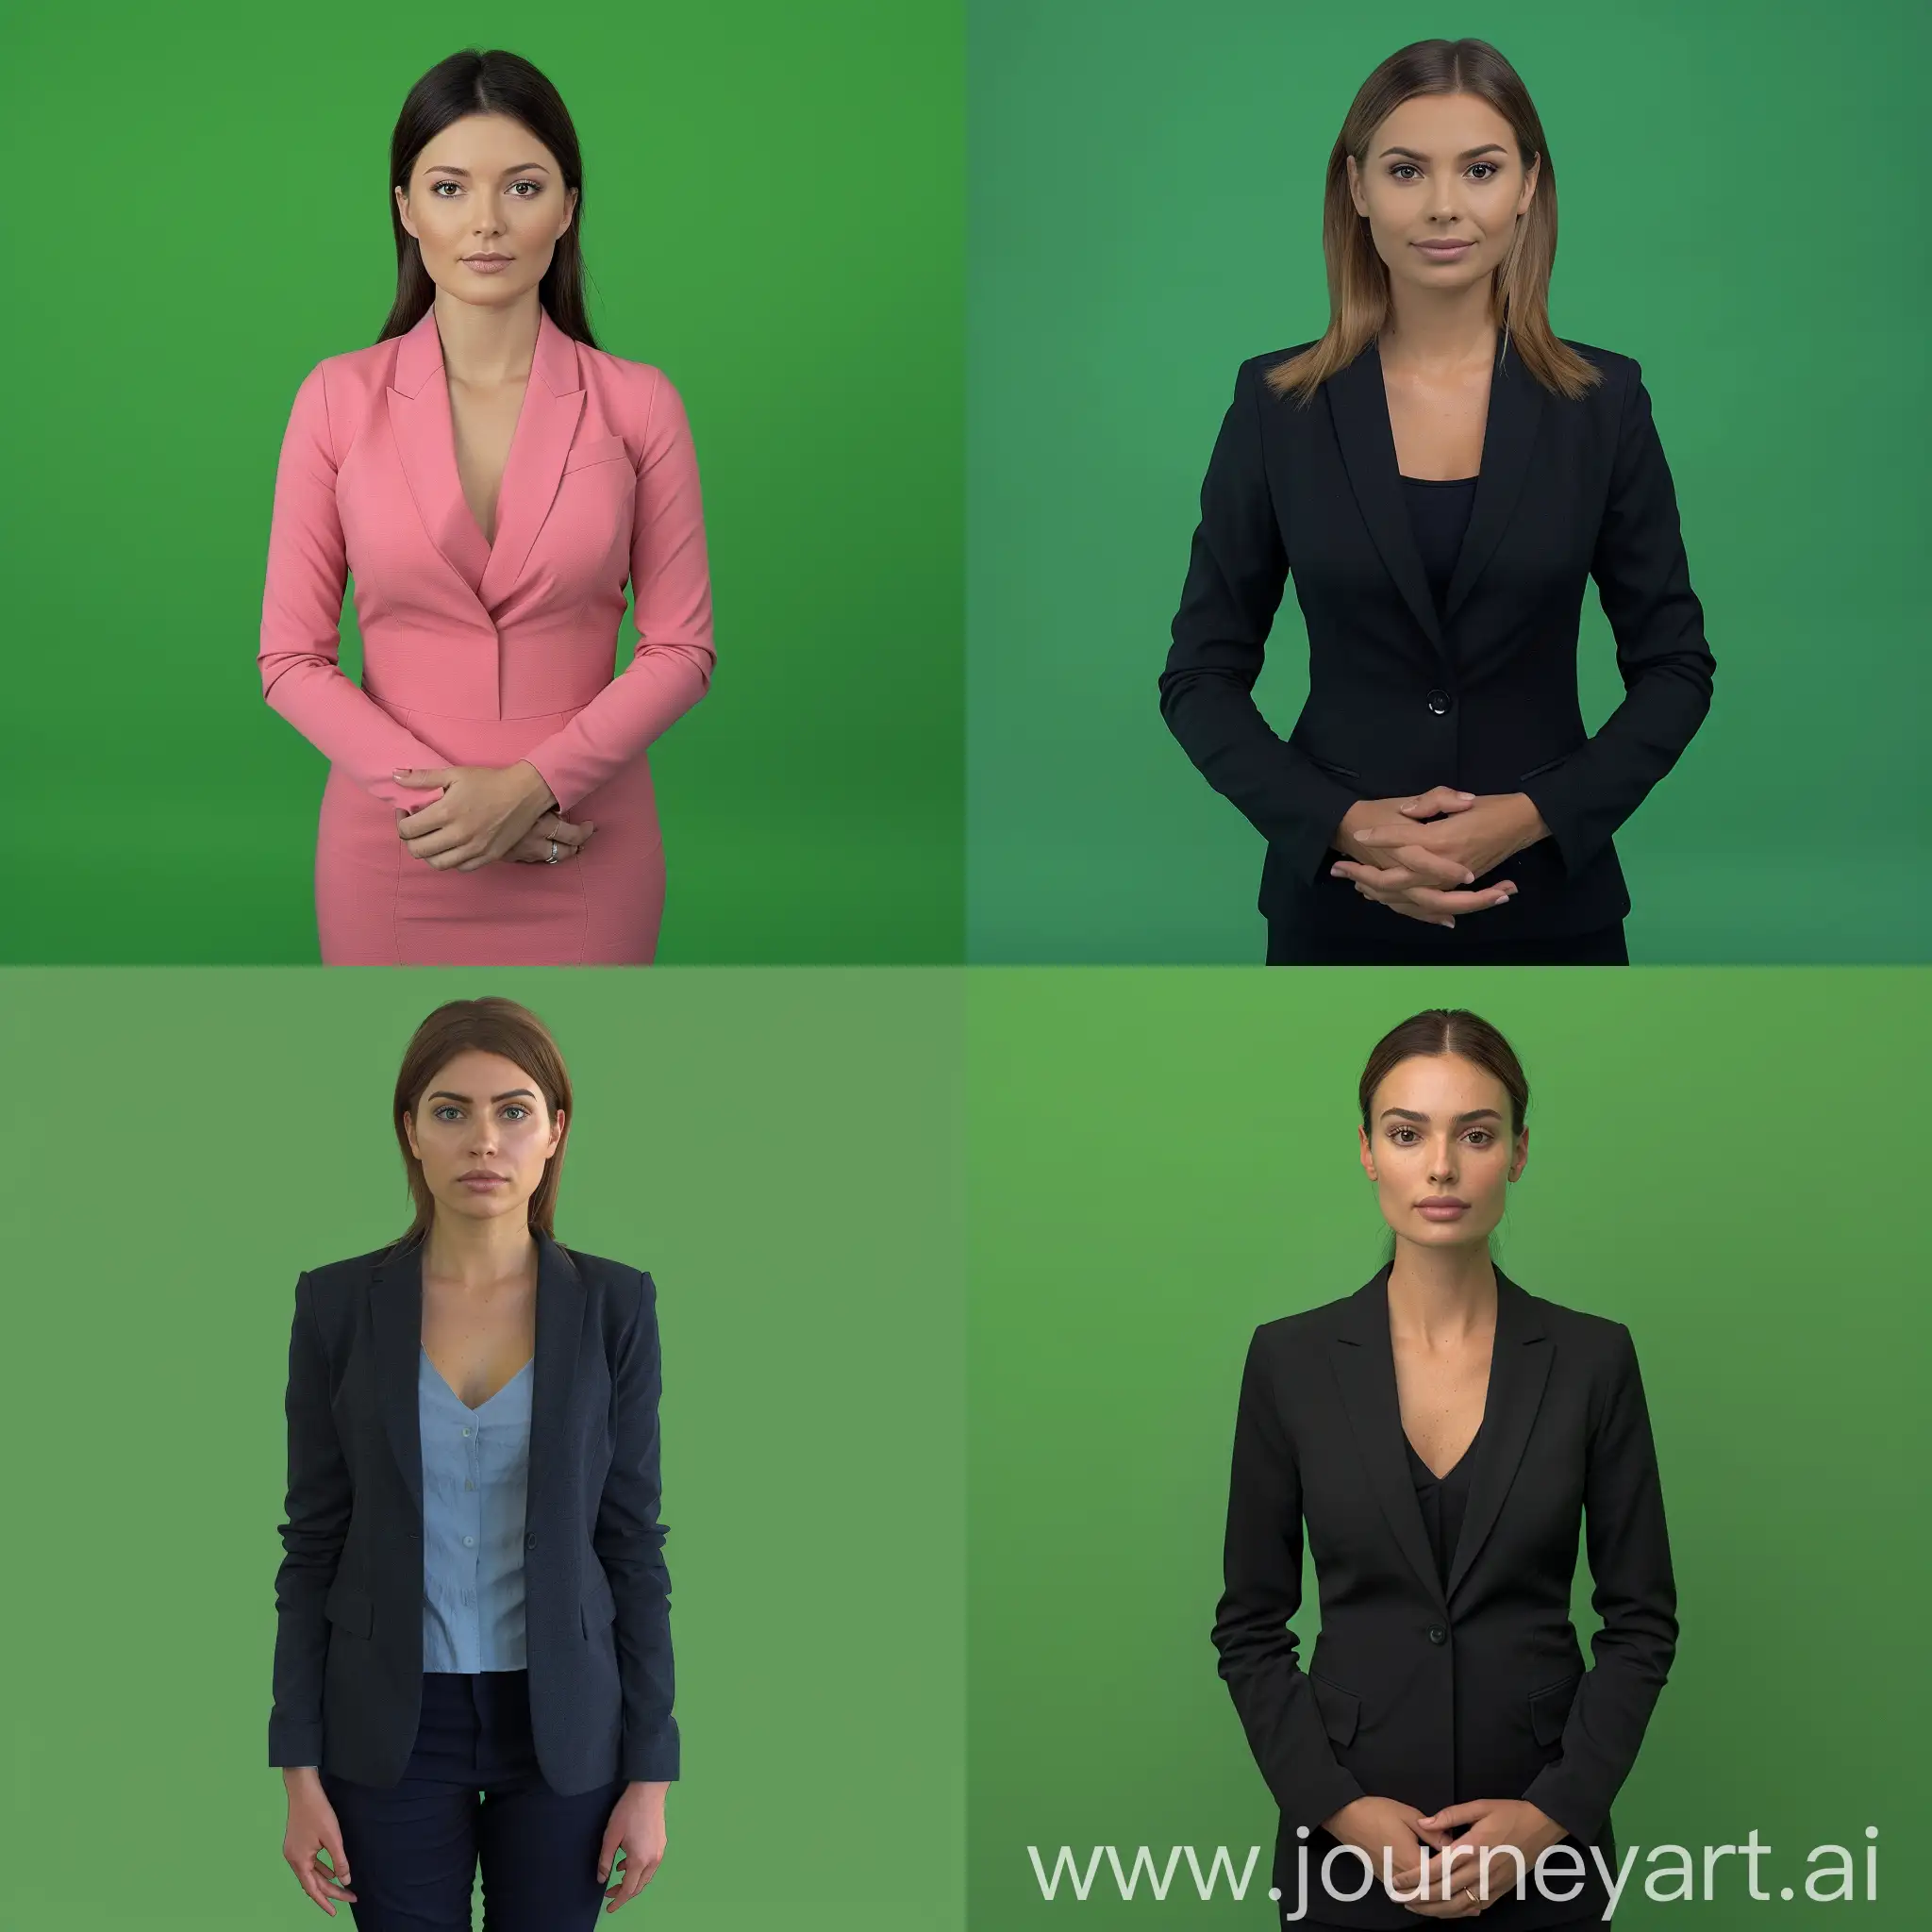 Produce a lifelike portrait of a formal female news presenter with appropriate clothing. The image should depict a presenter standing upright, still with no movement, use a head-to-belly portrait, with a natural expression ready to start telling the news 
in a rested and relaxed position. The presenter should have straight hair or neatly styled hair with minimal layers. Additionally, ensure that the presenter's hands are positioned naturally and comfortably, avoiding any awkward or unnatural poses.
Utilize a high-quality, front-facing photograph with well-defined lighting (avoiding any shadows as the light is from the front), also remove reflections.
Ensure that the background is a solid chroma ONE green only color (0x00FF00) without any reflections or variations in hue. 
To facilitate future cropping, ensure even borders with solid colors, without gradients, for both the borders of the person and the background.